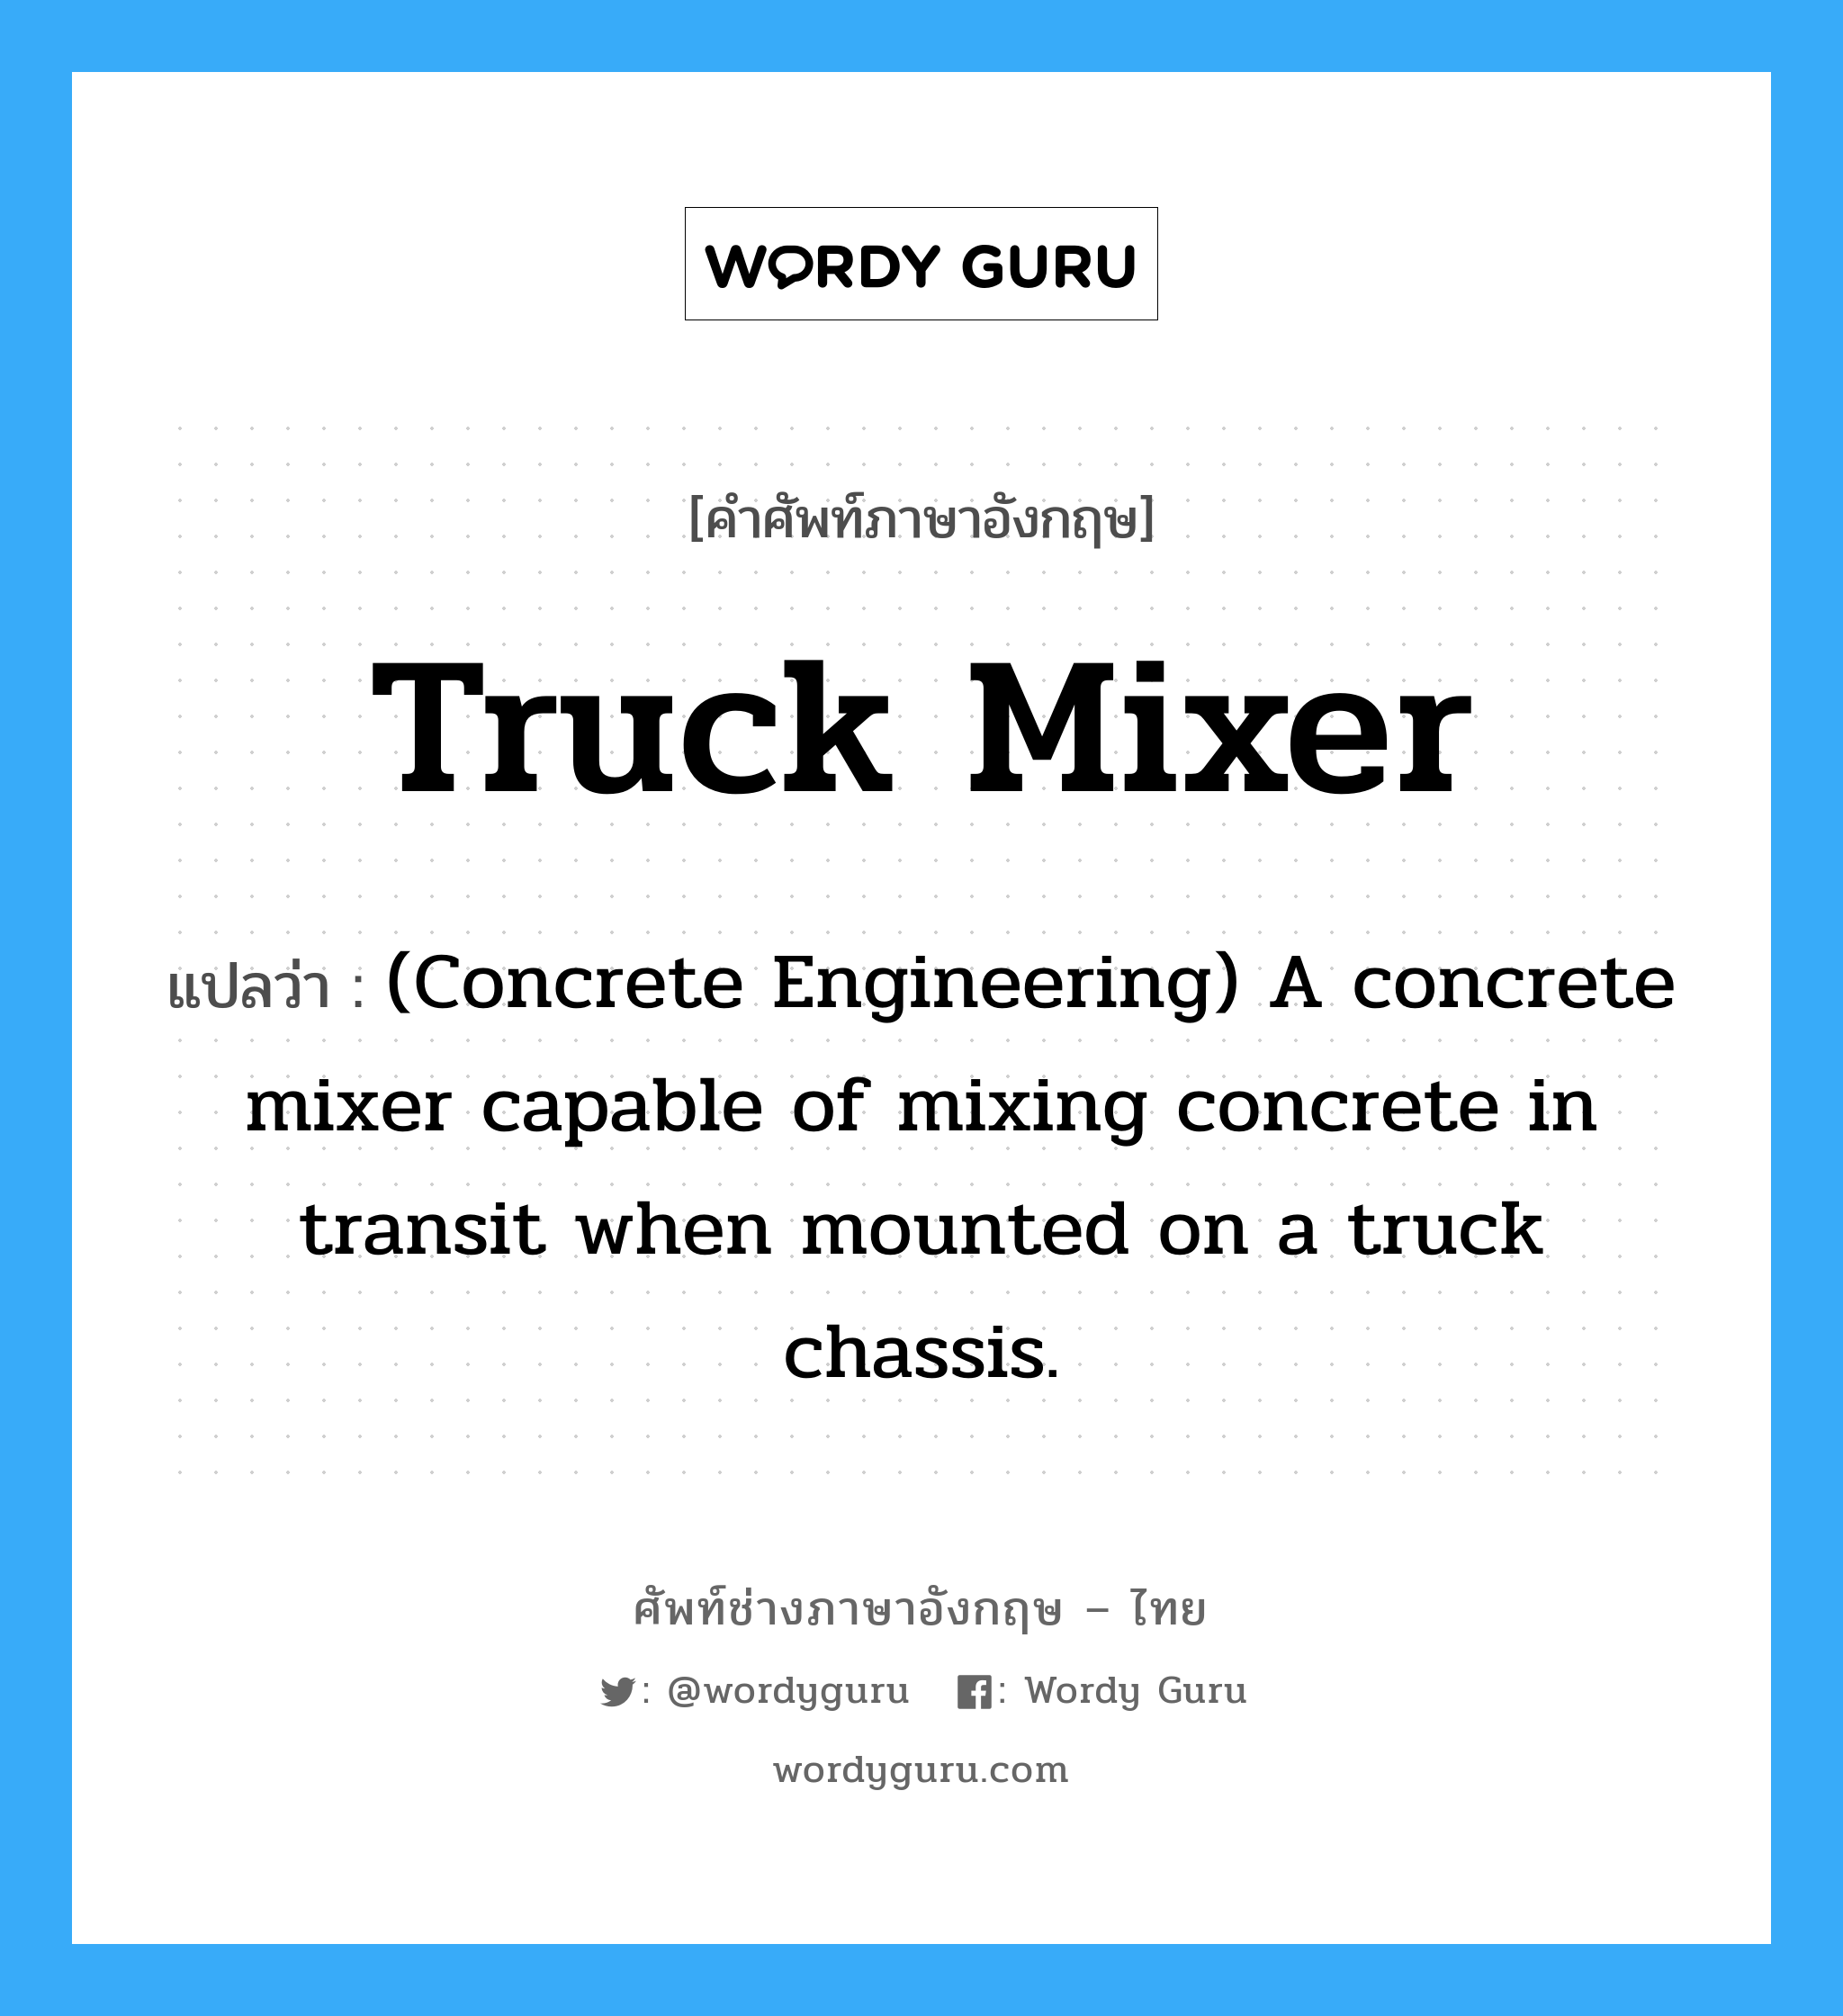 (Concrete Engineering) A concrete mixer capable of mixing concrete in transit when mounted on a truck chassis. ภาษาอังกฤษ?, คำศัพท์ช่างภาษาอังกฤษ - ไทย (Concrete Engineering) A concrete mixer capable of mixing concrete in transit when mounted on a truck chassis. คำศัพท์ภาษาอังกฤษ (Concrete Engineering) A concrete mixer capable of mixing concrete in transit when mounted on a truck chassis. แปลว่า Truck Mixer